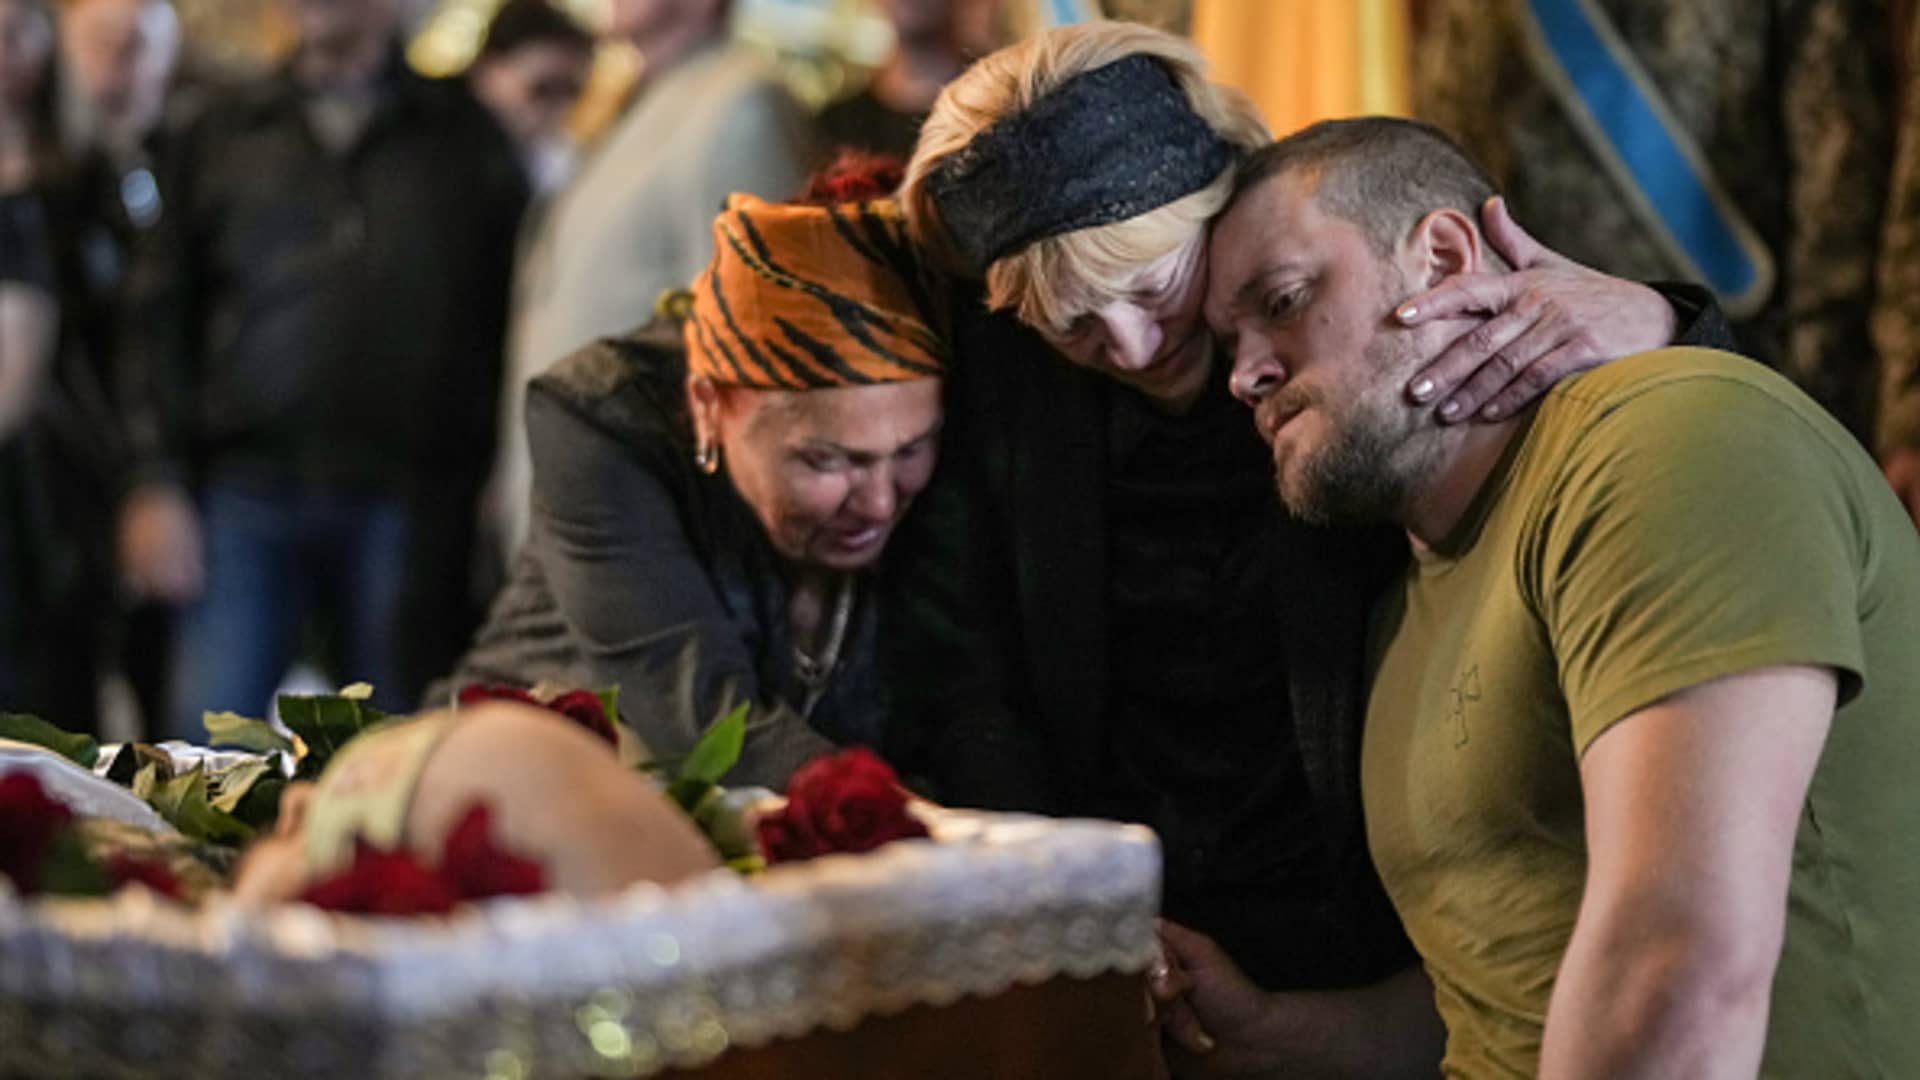 Relatives, friends and comrades of Ukrainian soldier Eduardo Trepilchenko, who was killed on the Eastern front battling the Russian invasion, attend his funeral at St Michael's Cathedral on May 25, 2022 in Kyiv, Ukraine.